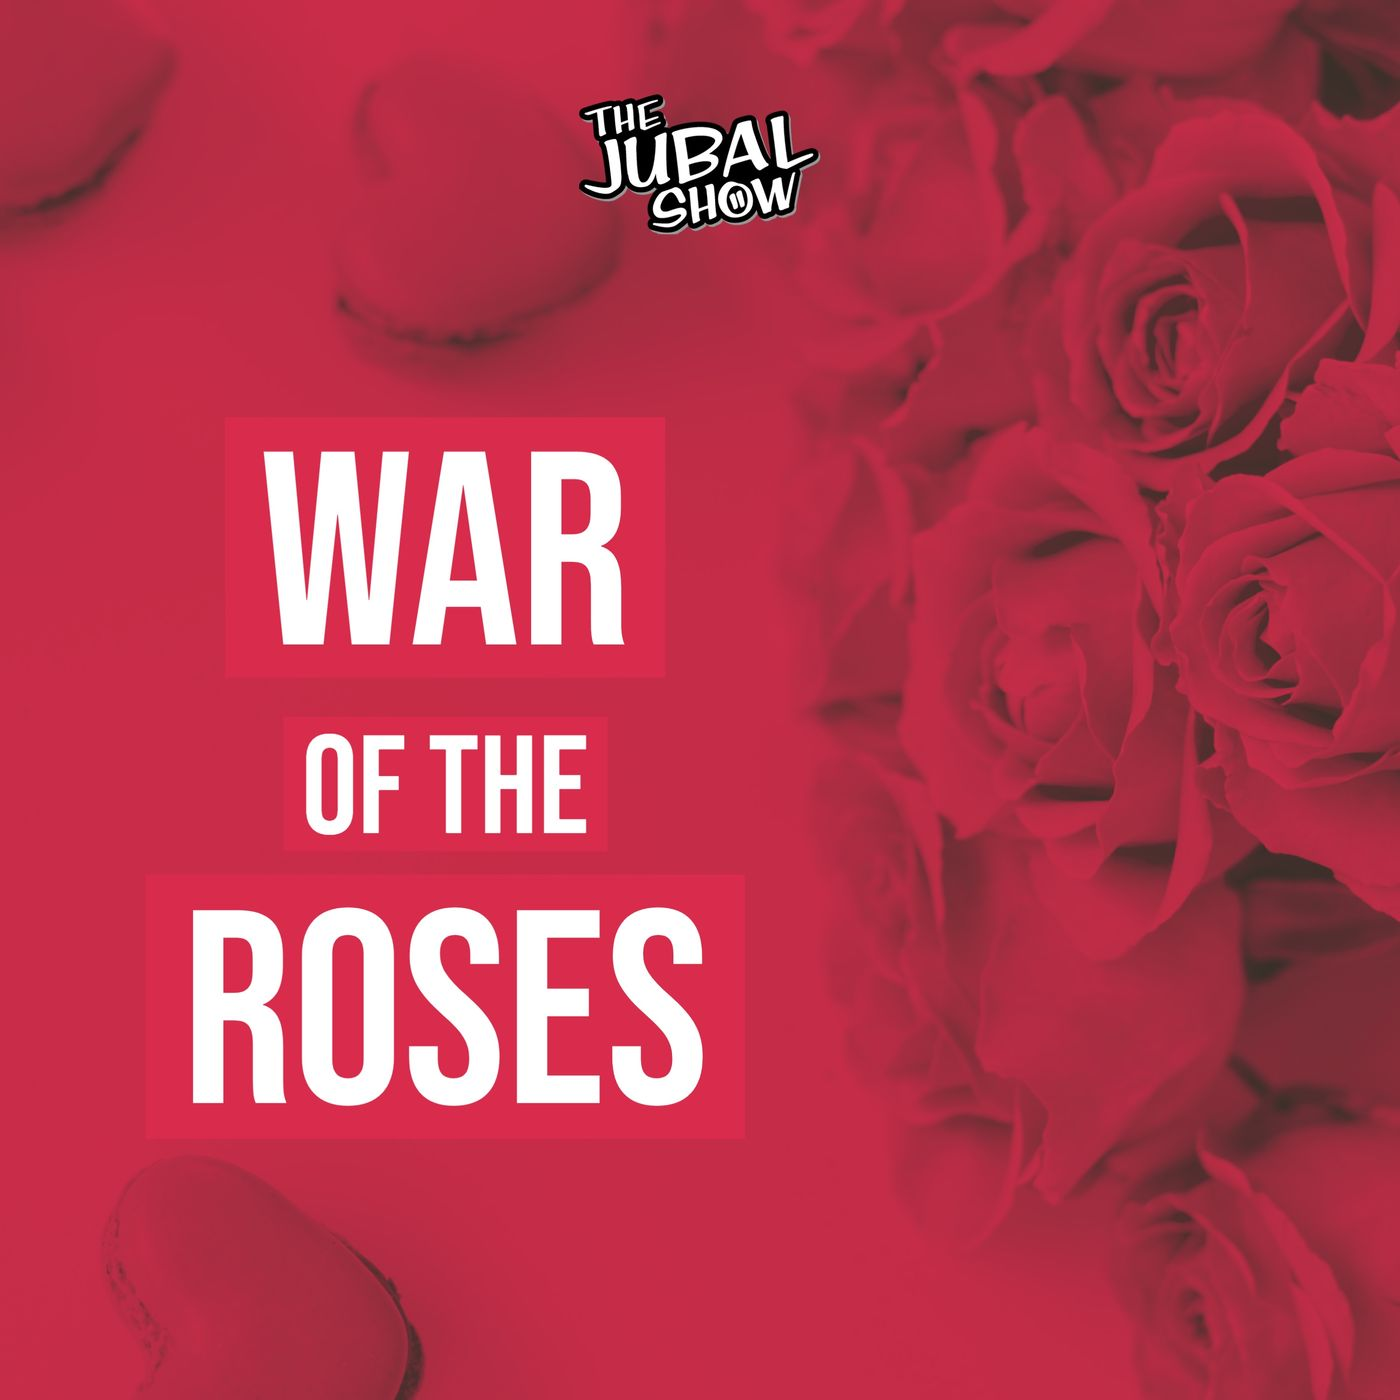 An argument goes too far in this War of the Roses!